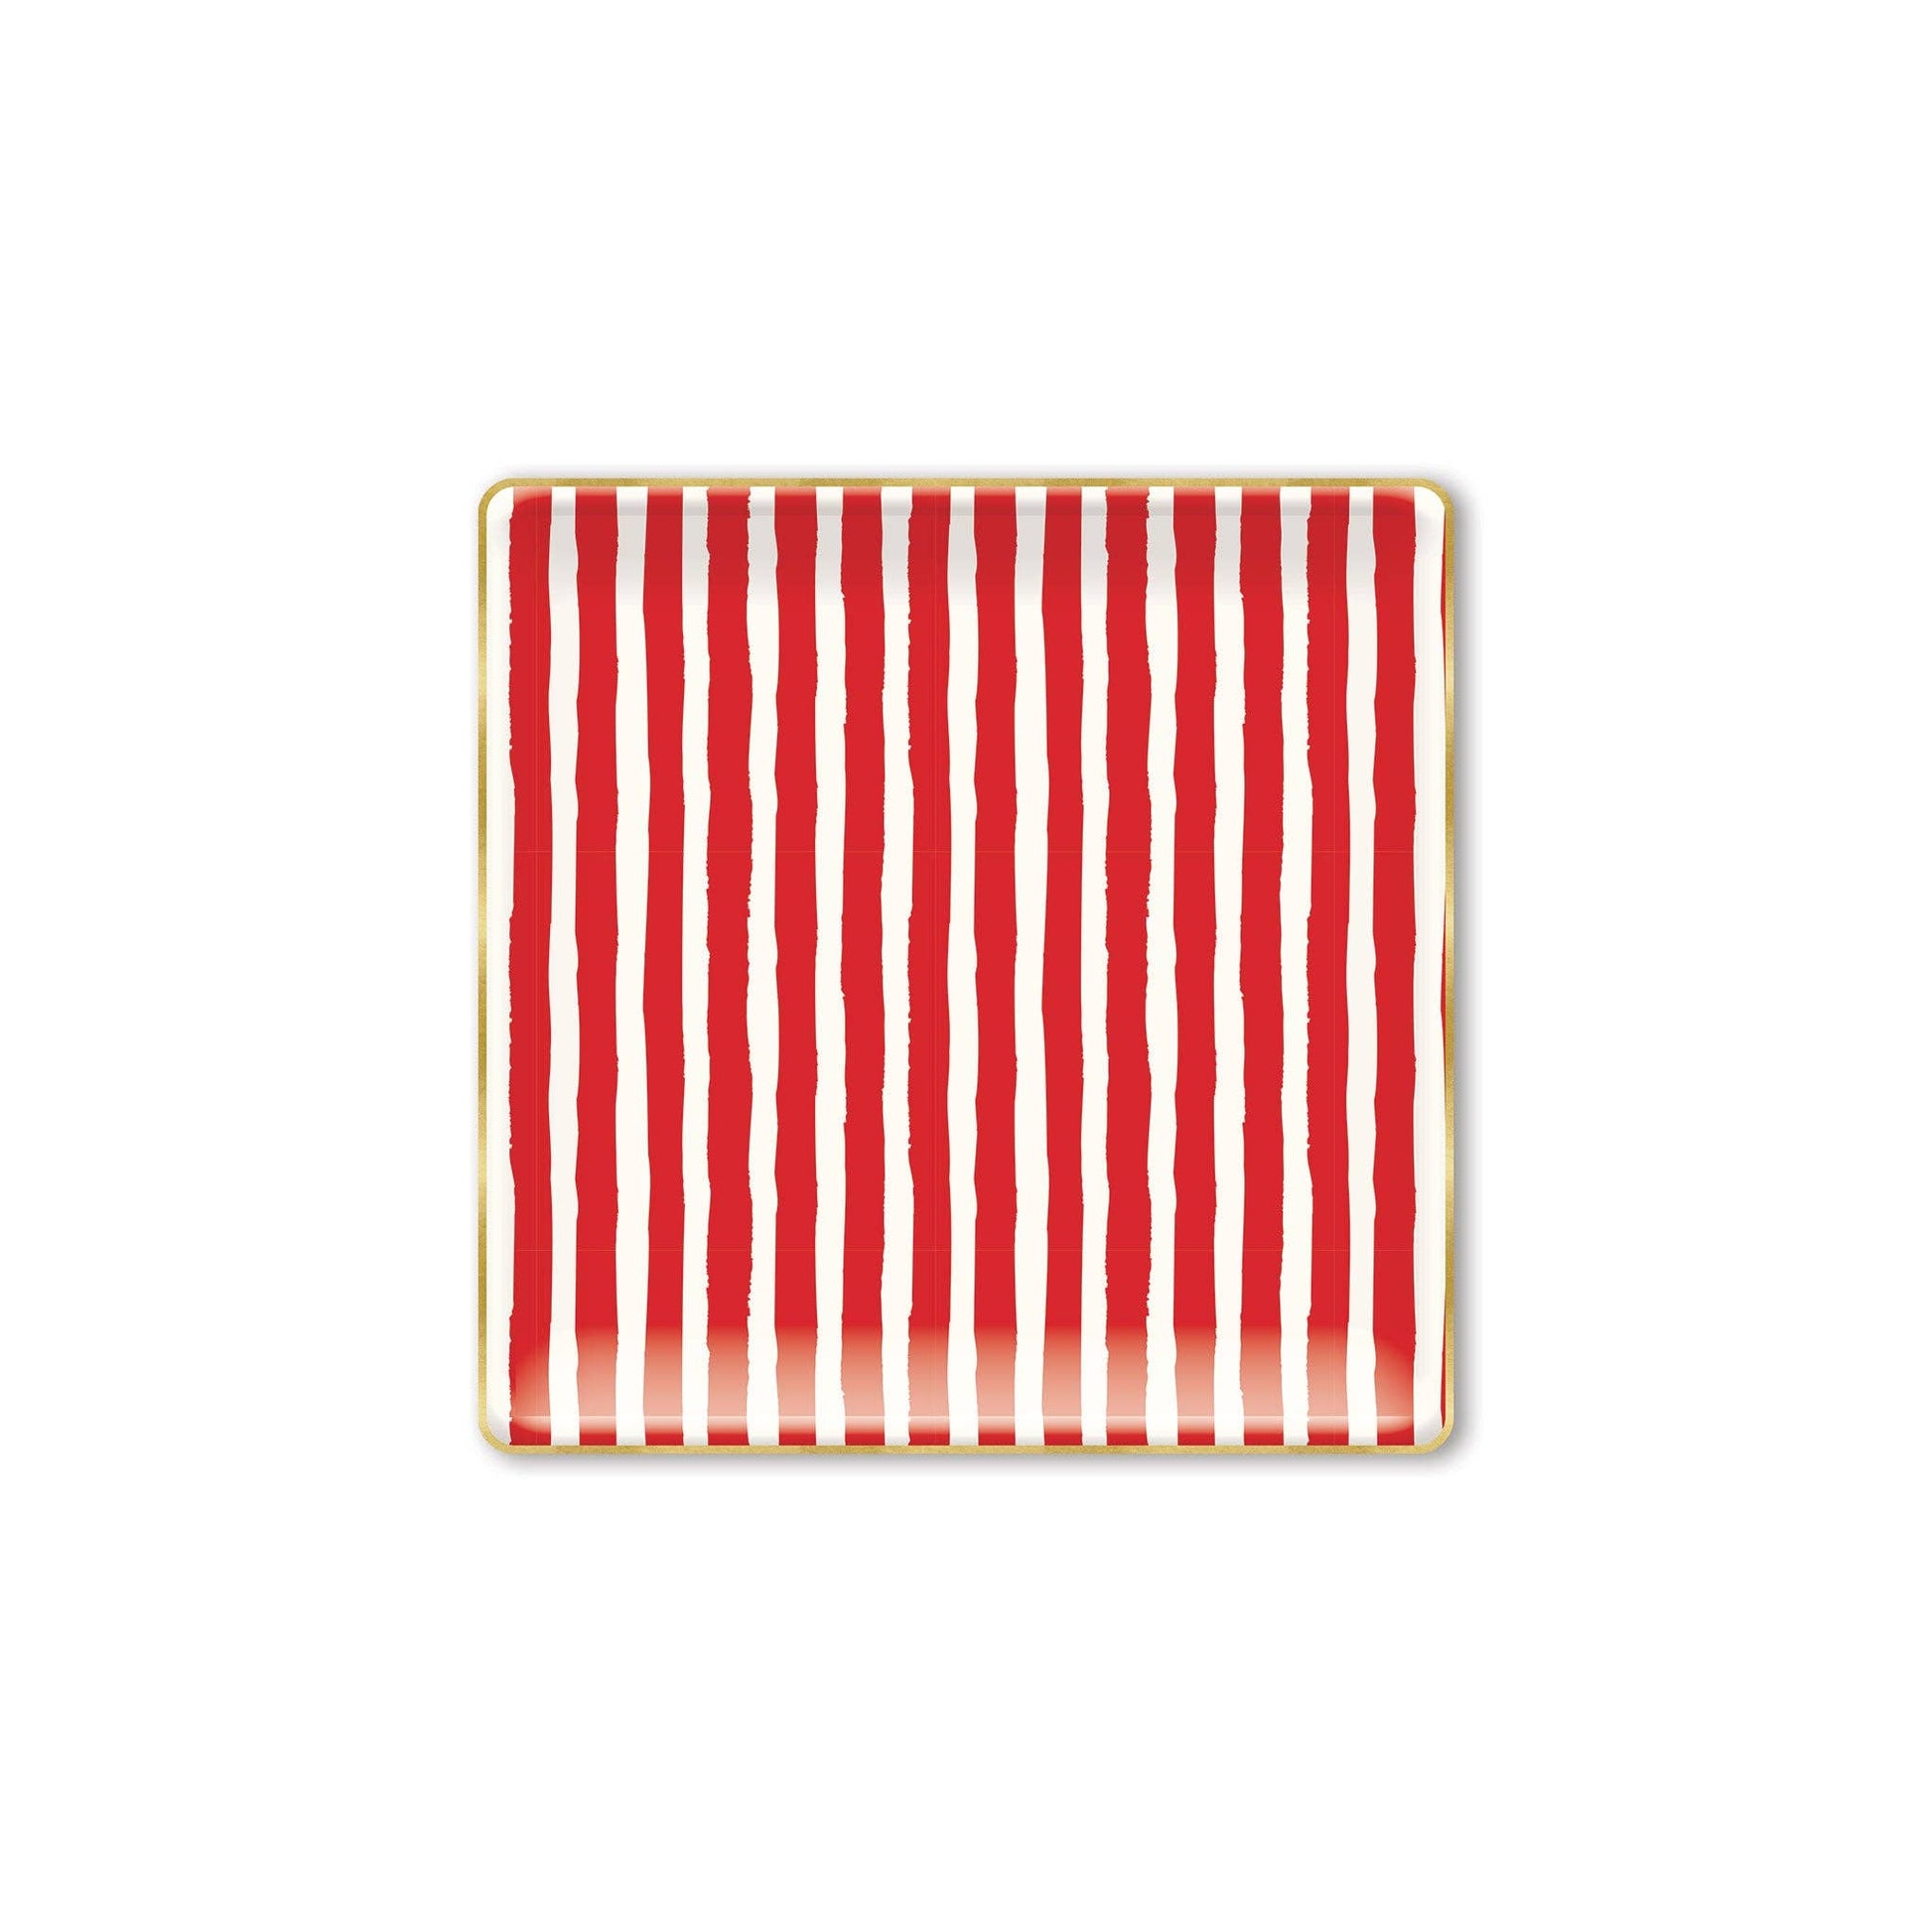 Holly jolly stripes makes these 8 inch party plates perfect to add holiday spirit to the table at your Christmas party